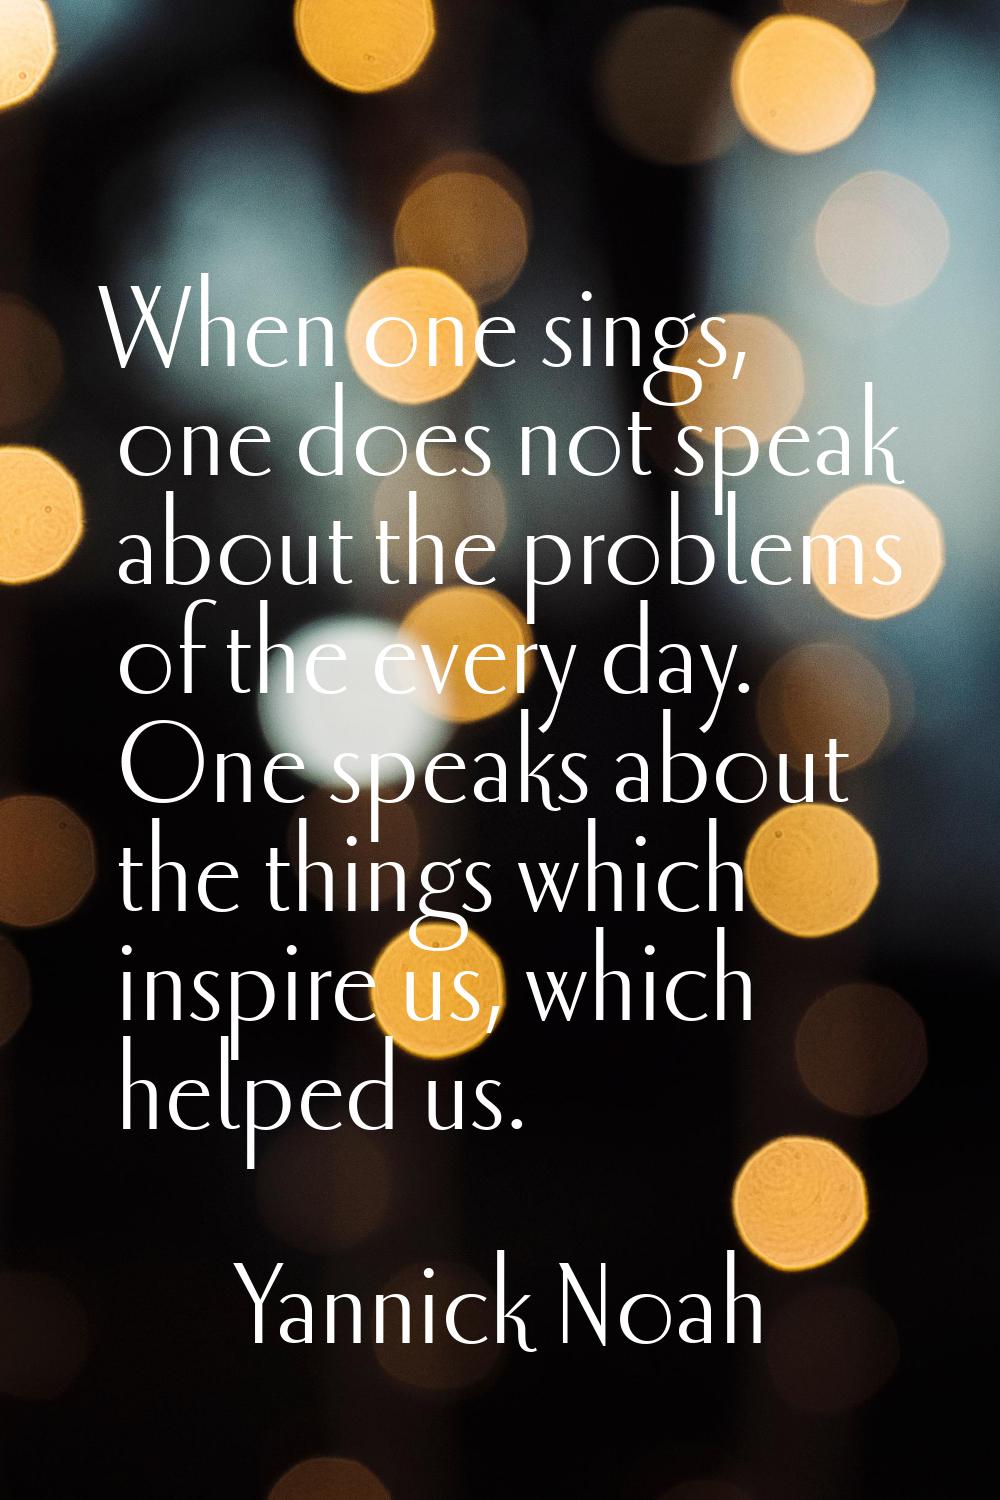 When one sings, one does not speak about the problems of the every day. One speaks about the things